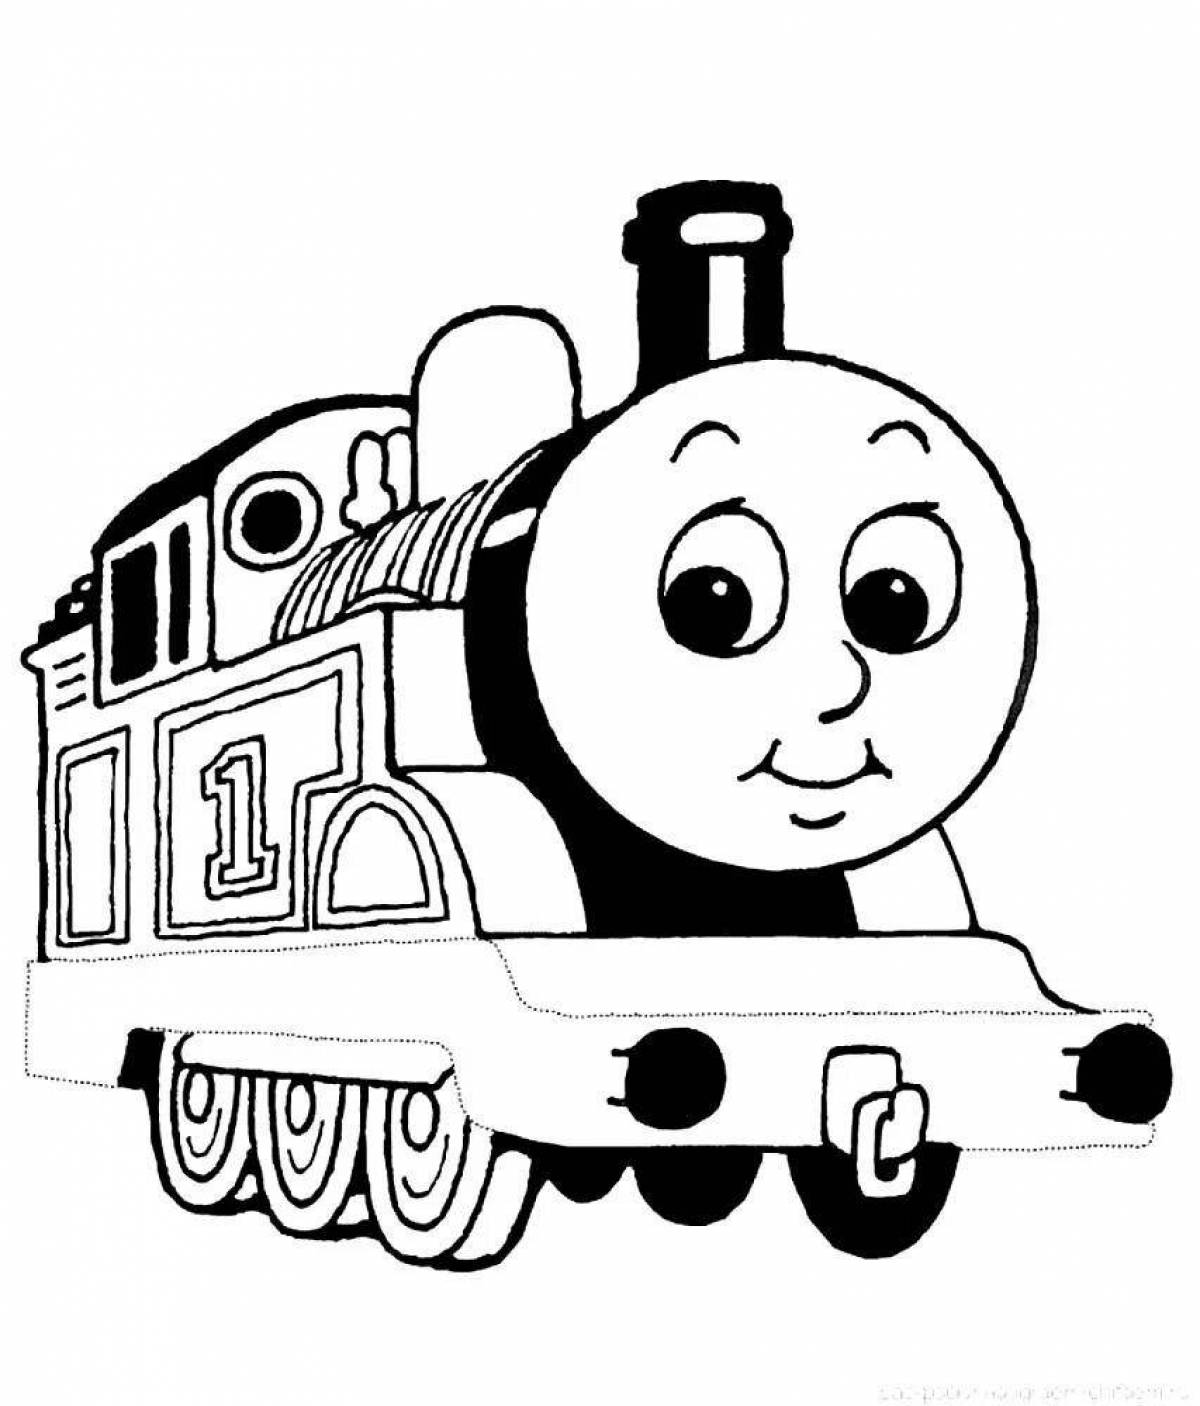 Children's train color-frenzy coloring book